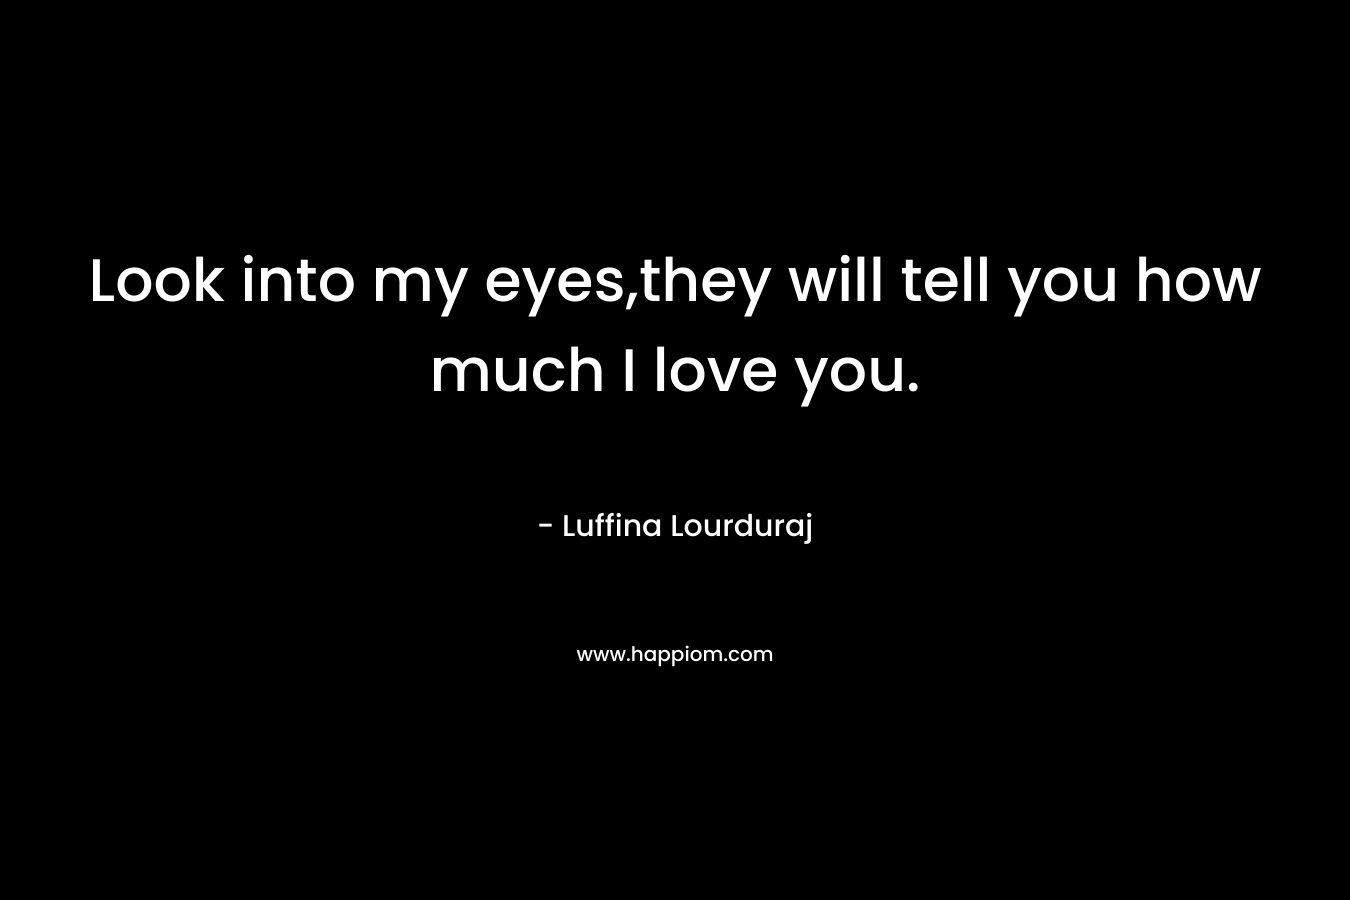 Look into my eyes,they will tell you how much I love you.